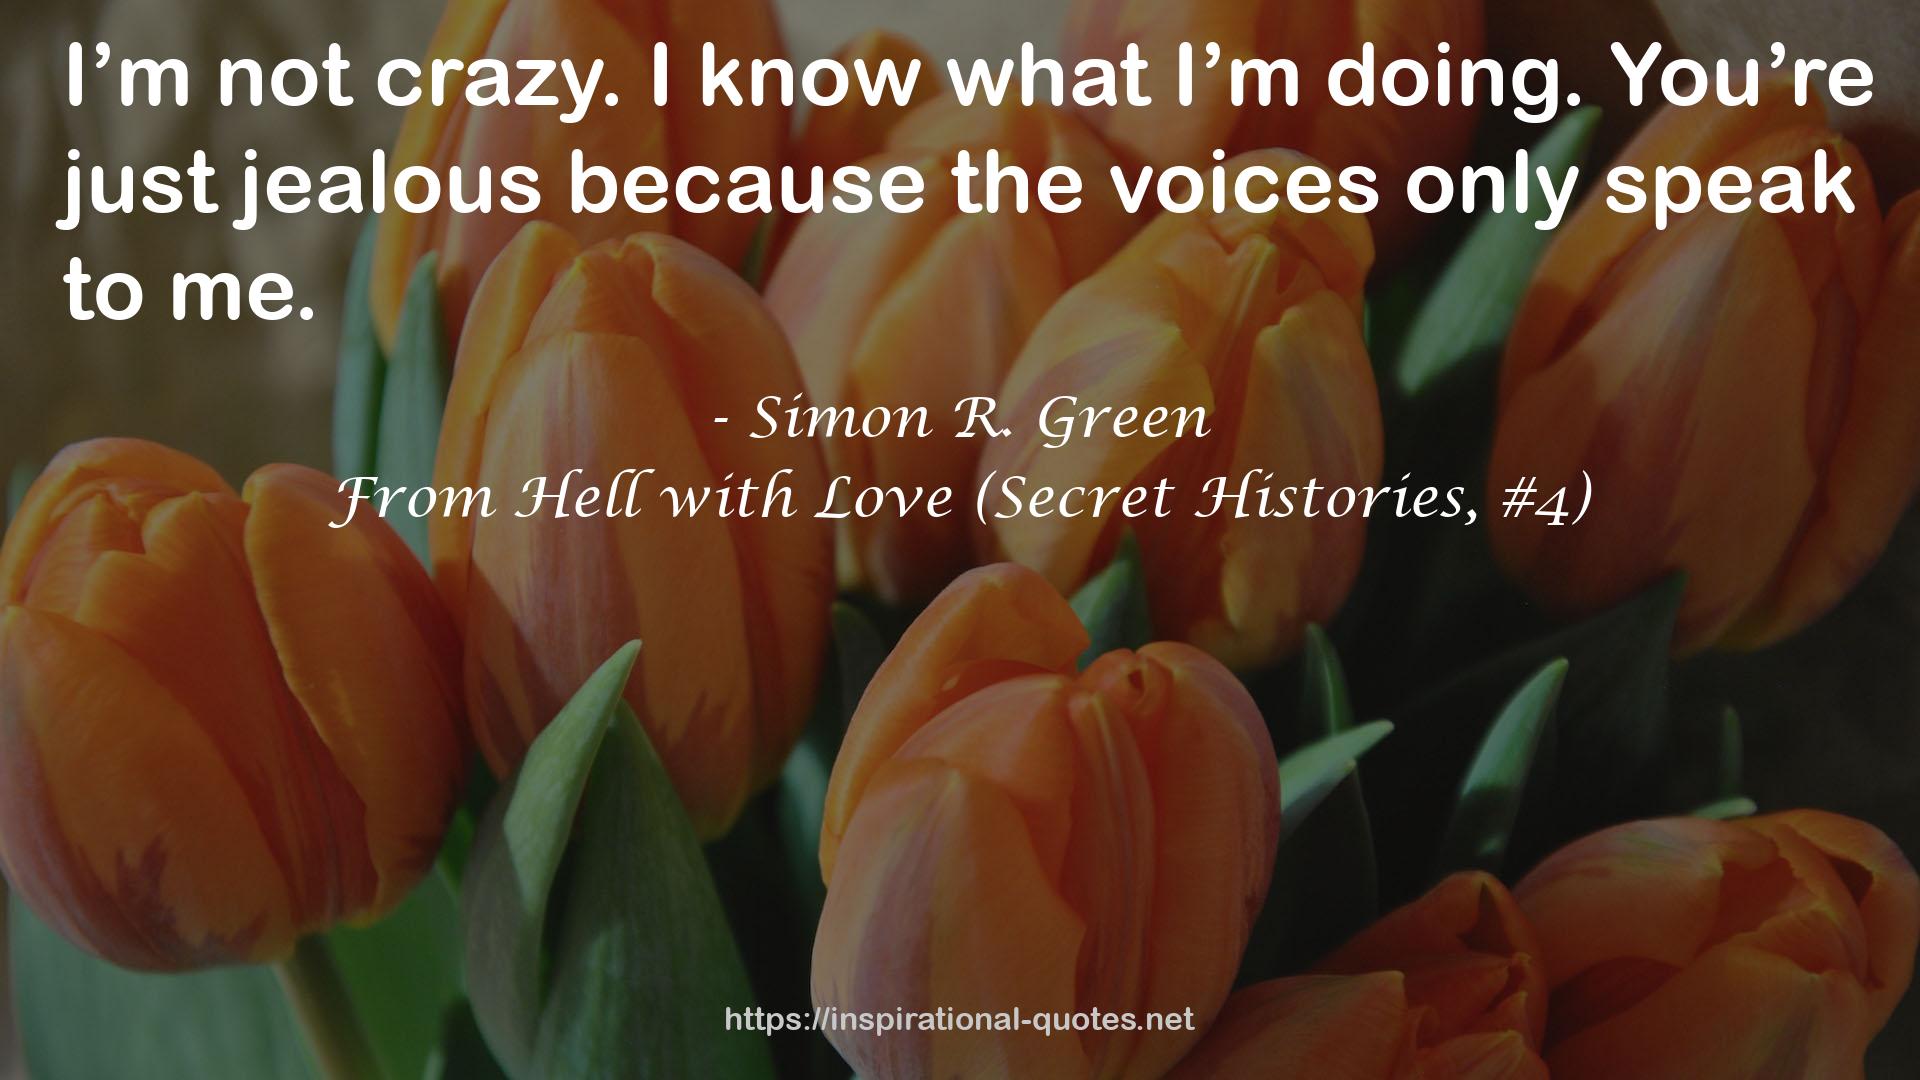 From Hell with Love (Secret Histories, #4) QUOTES